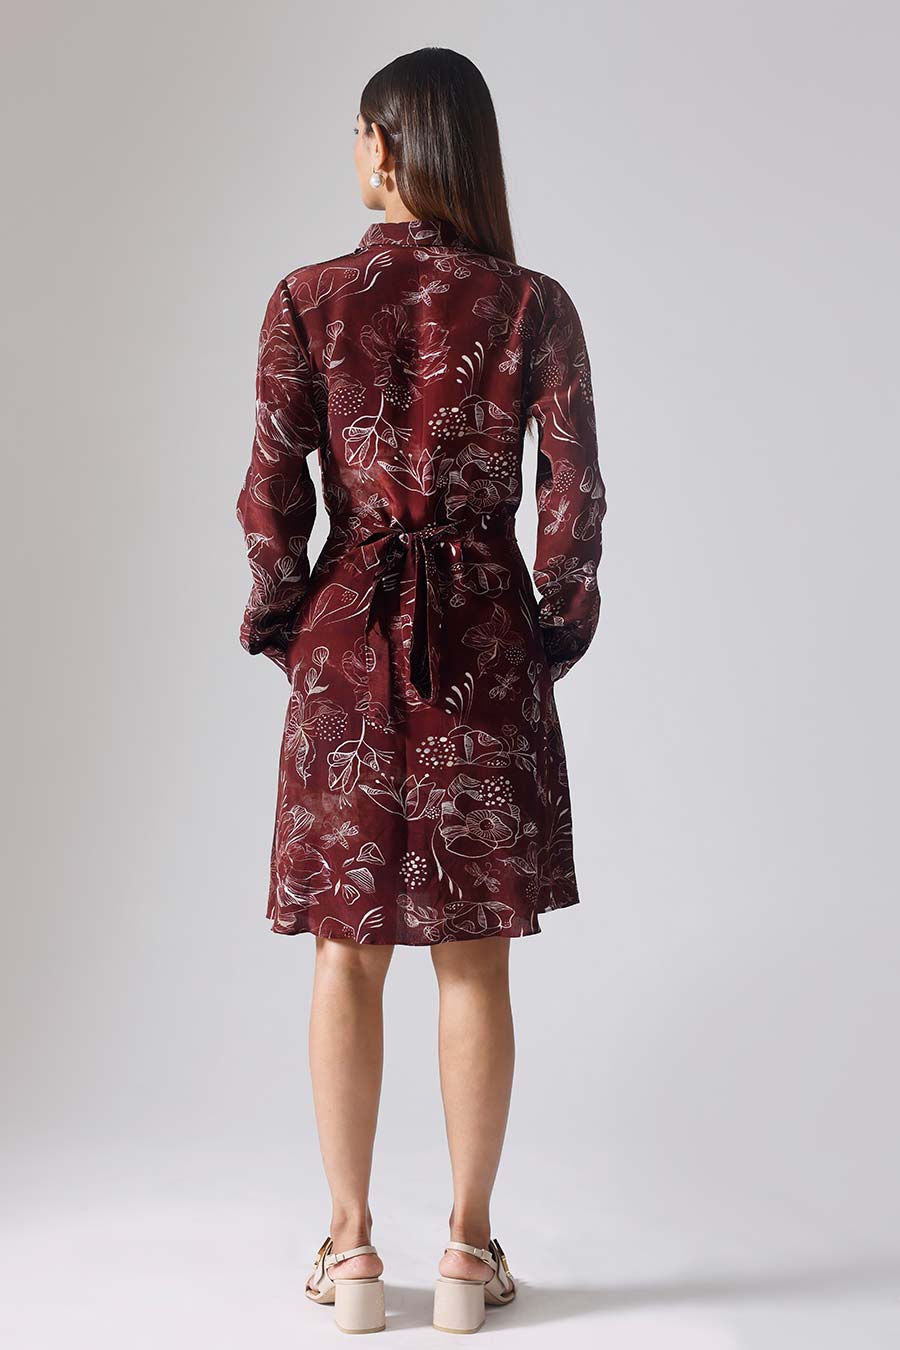 Marbled Wine Printed Reverie Shirt Dress